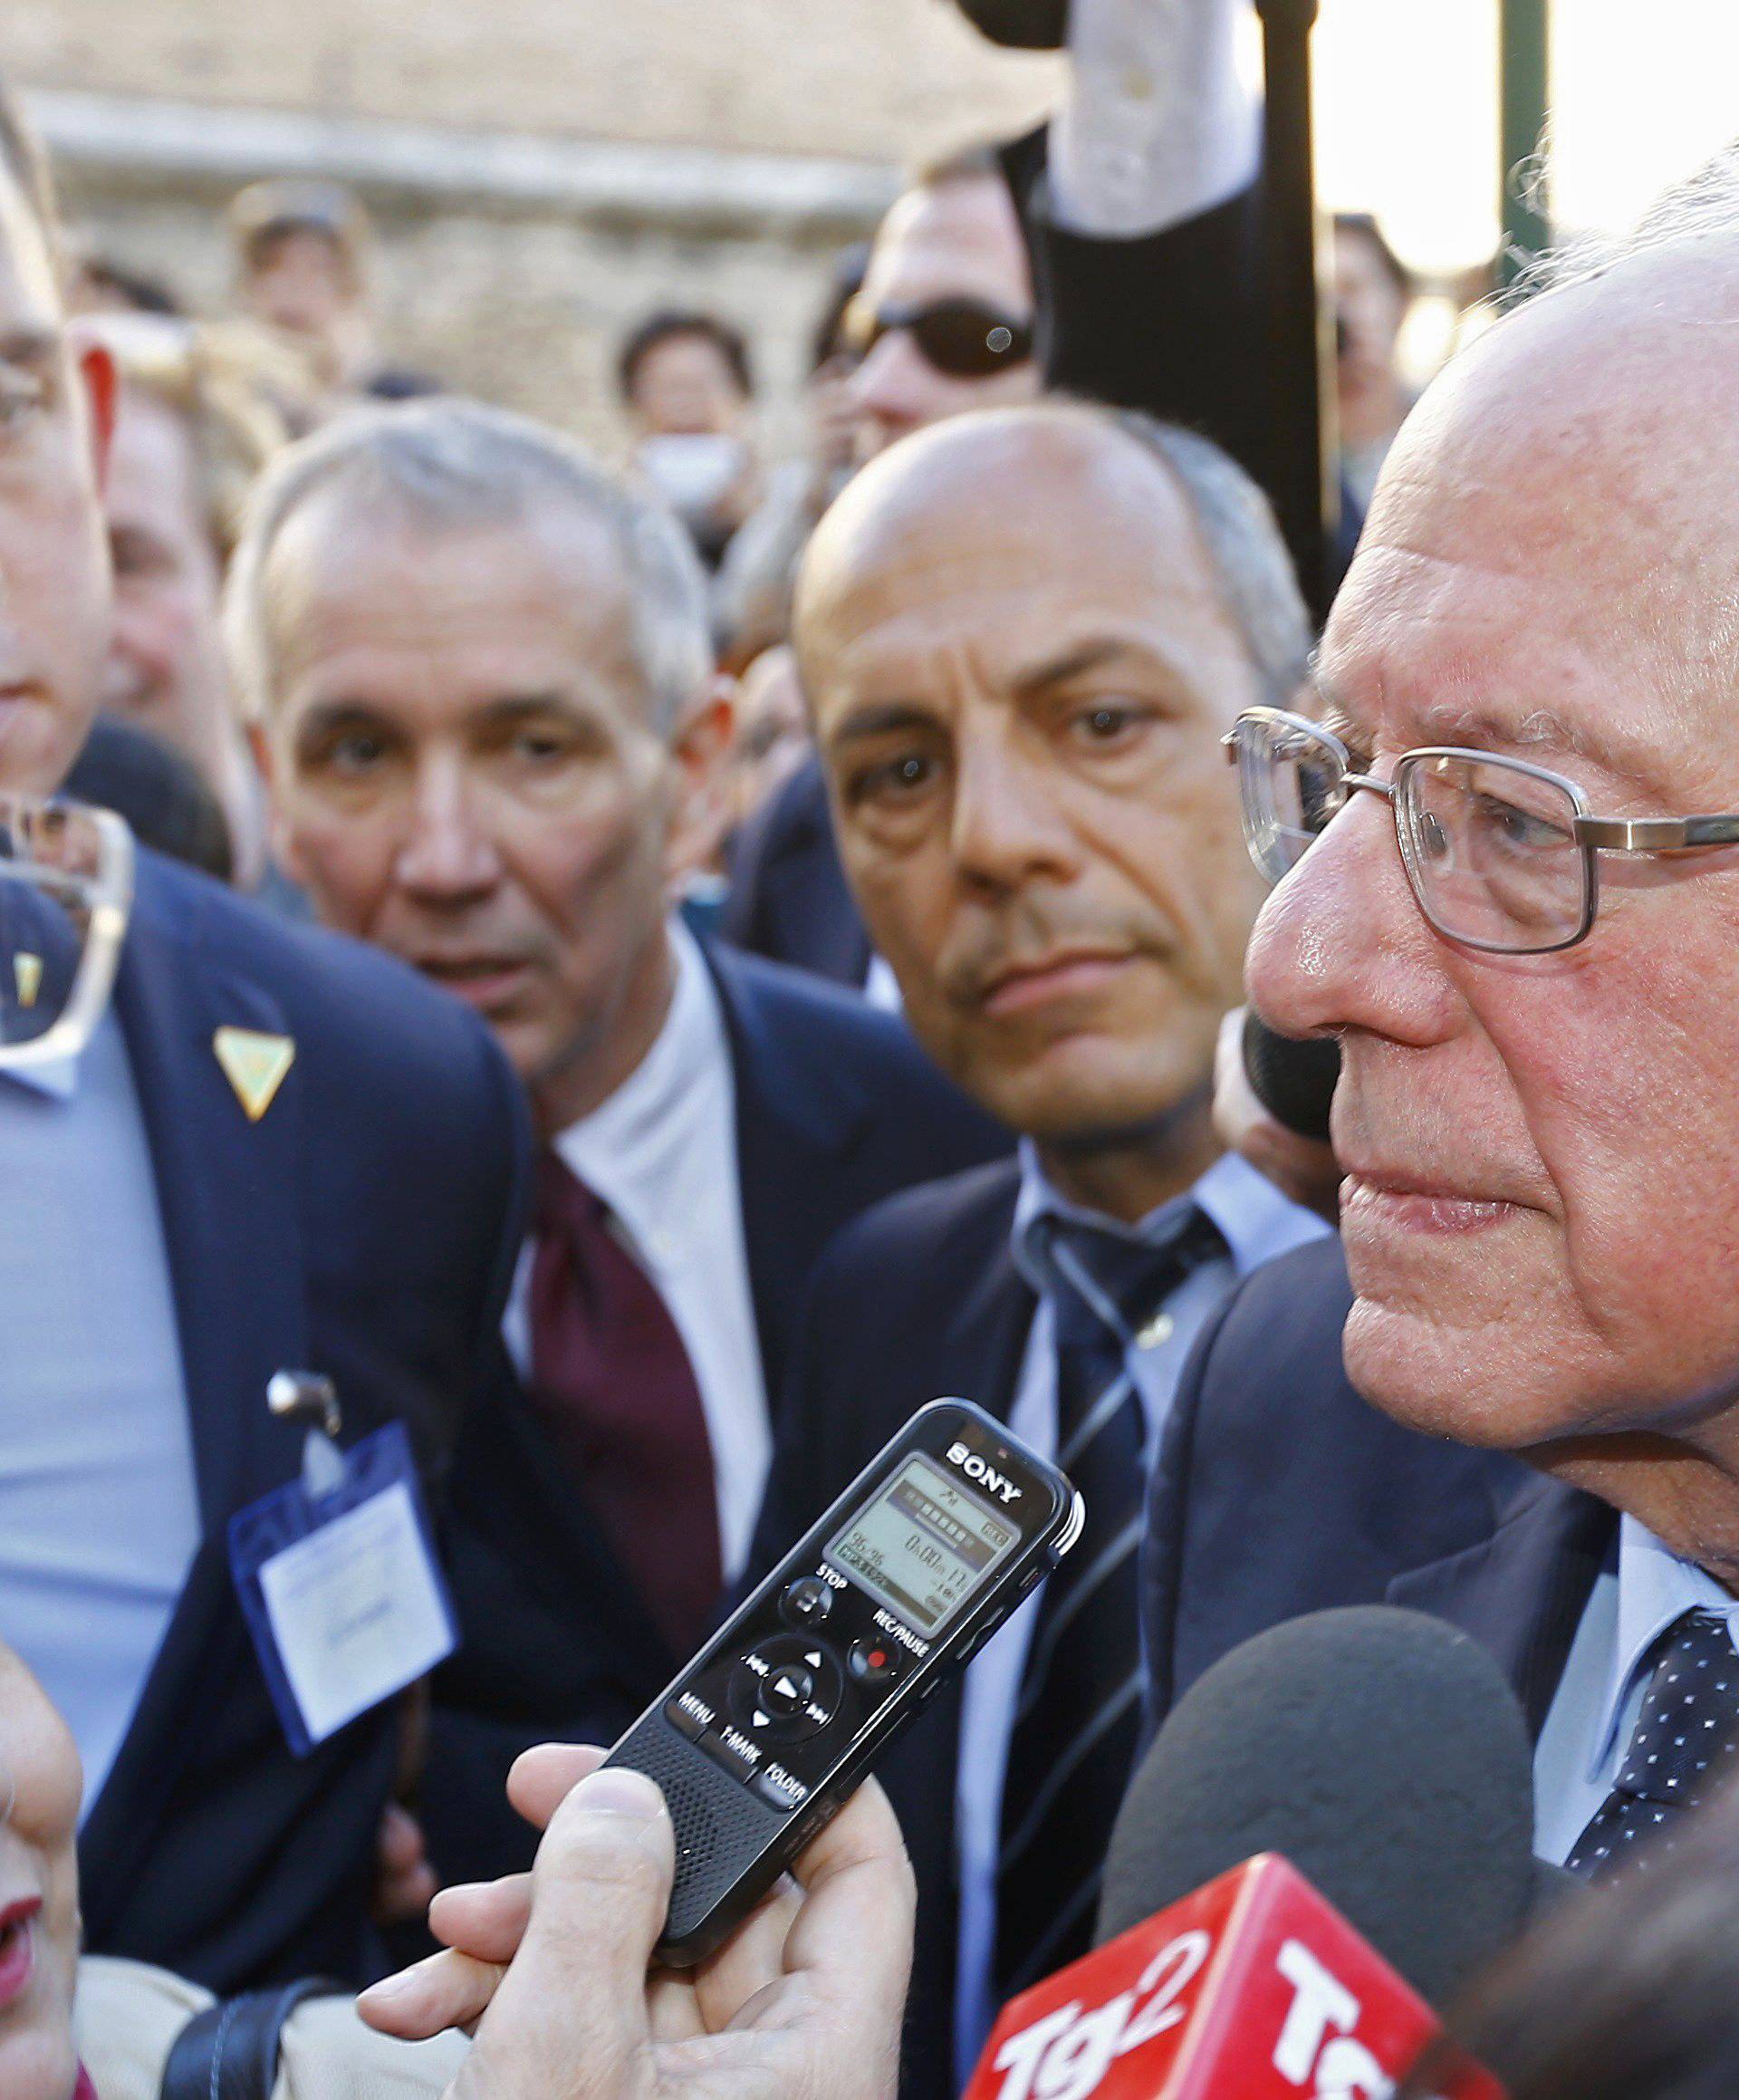 U.S. Democratic presidential candidate Sanders speaks with media and supporters during his visit to the Vatican